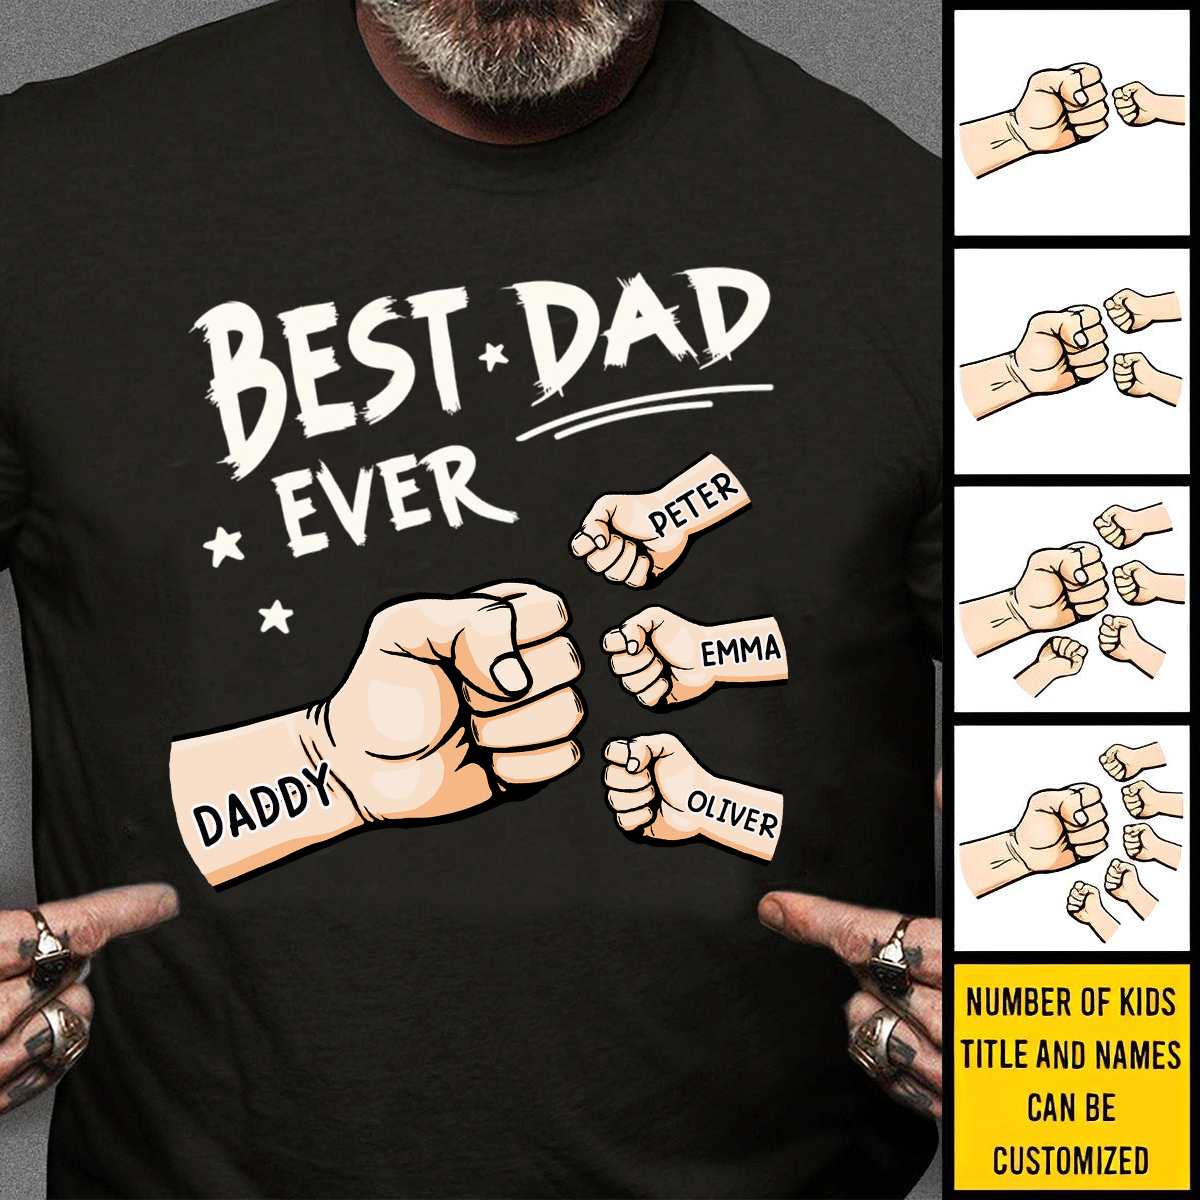 The Best Dad Ever - Family Personalized Unisex T-shirt - Father's Day, Birthday Gift For Dad